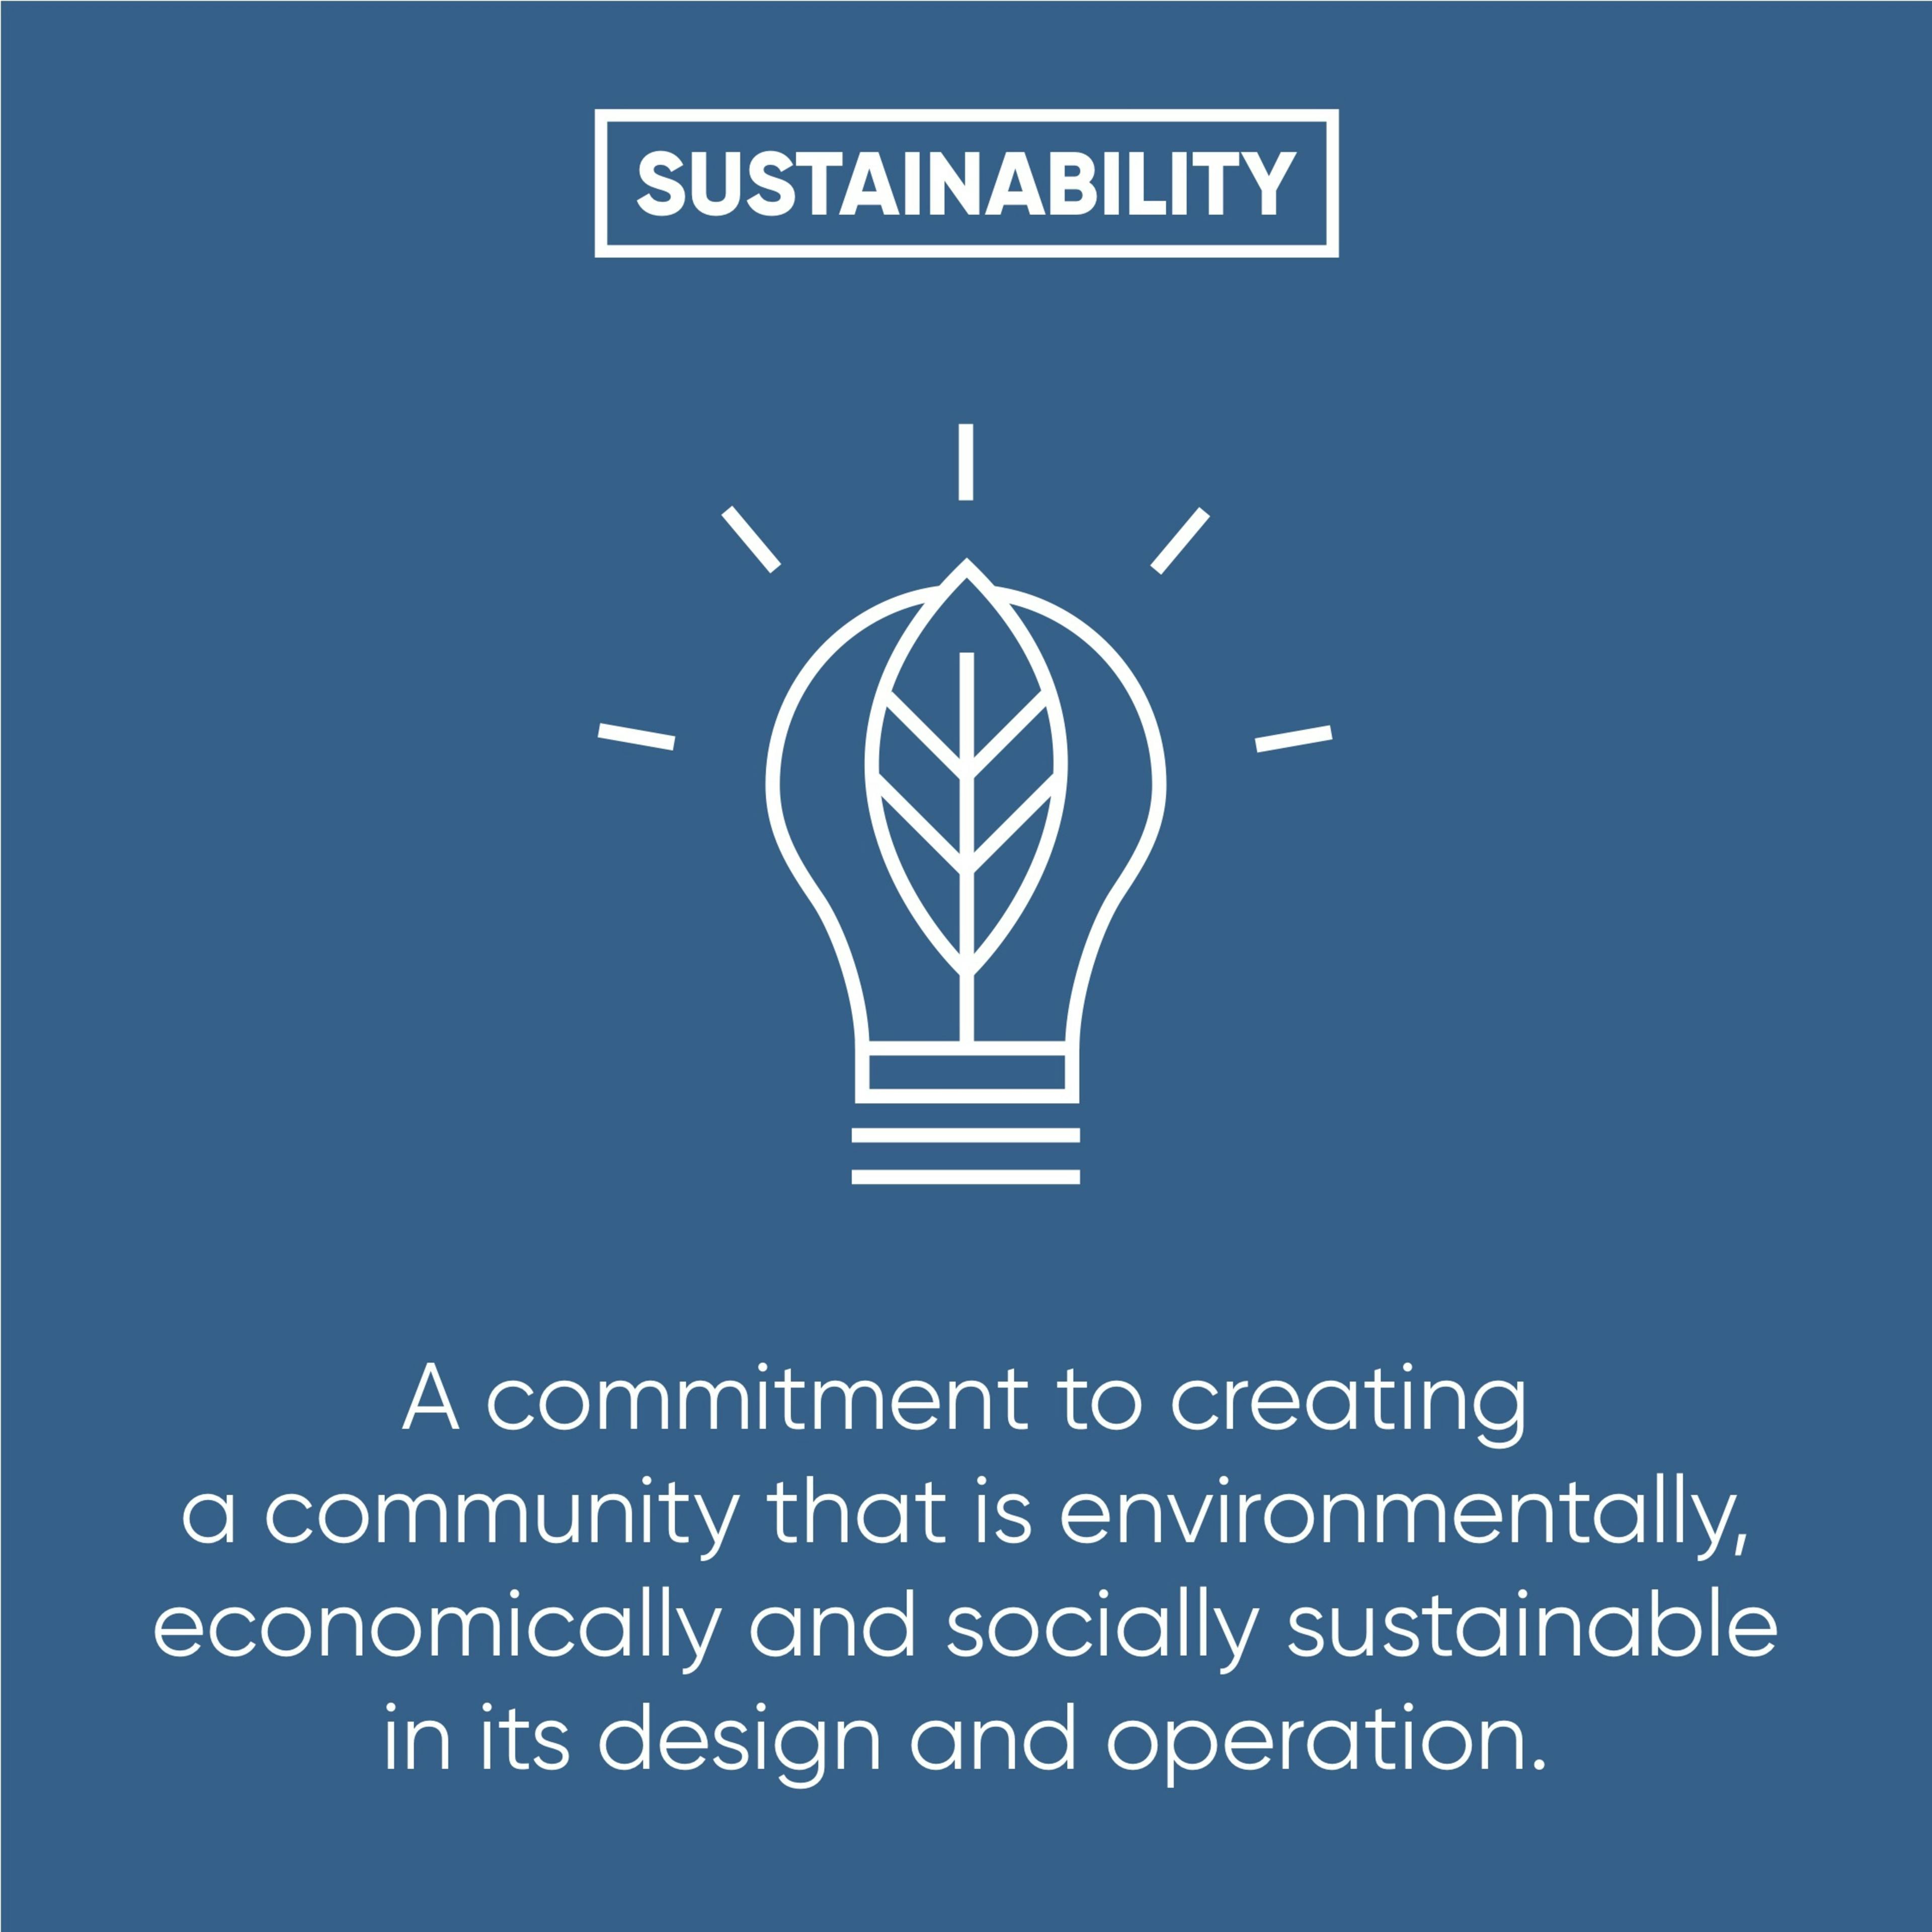 Infographic text: Sustainability. A commitment to creating a community that is environmentally, economically and socially sustainable in its design and operation.